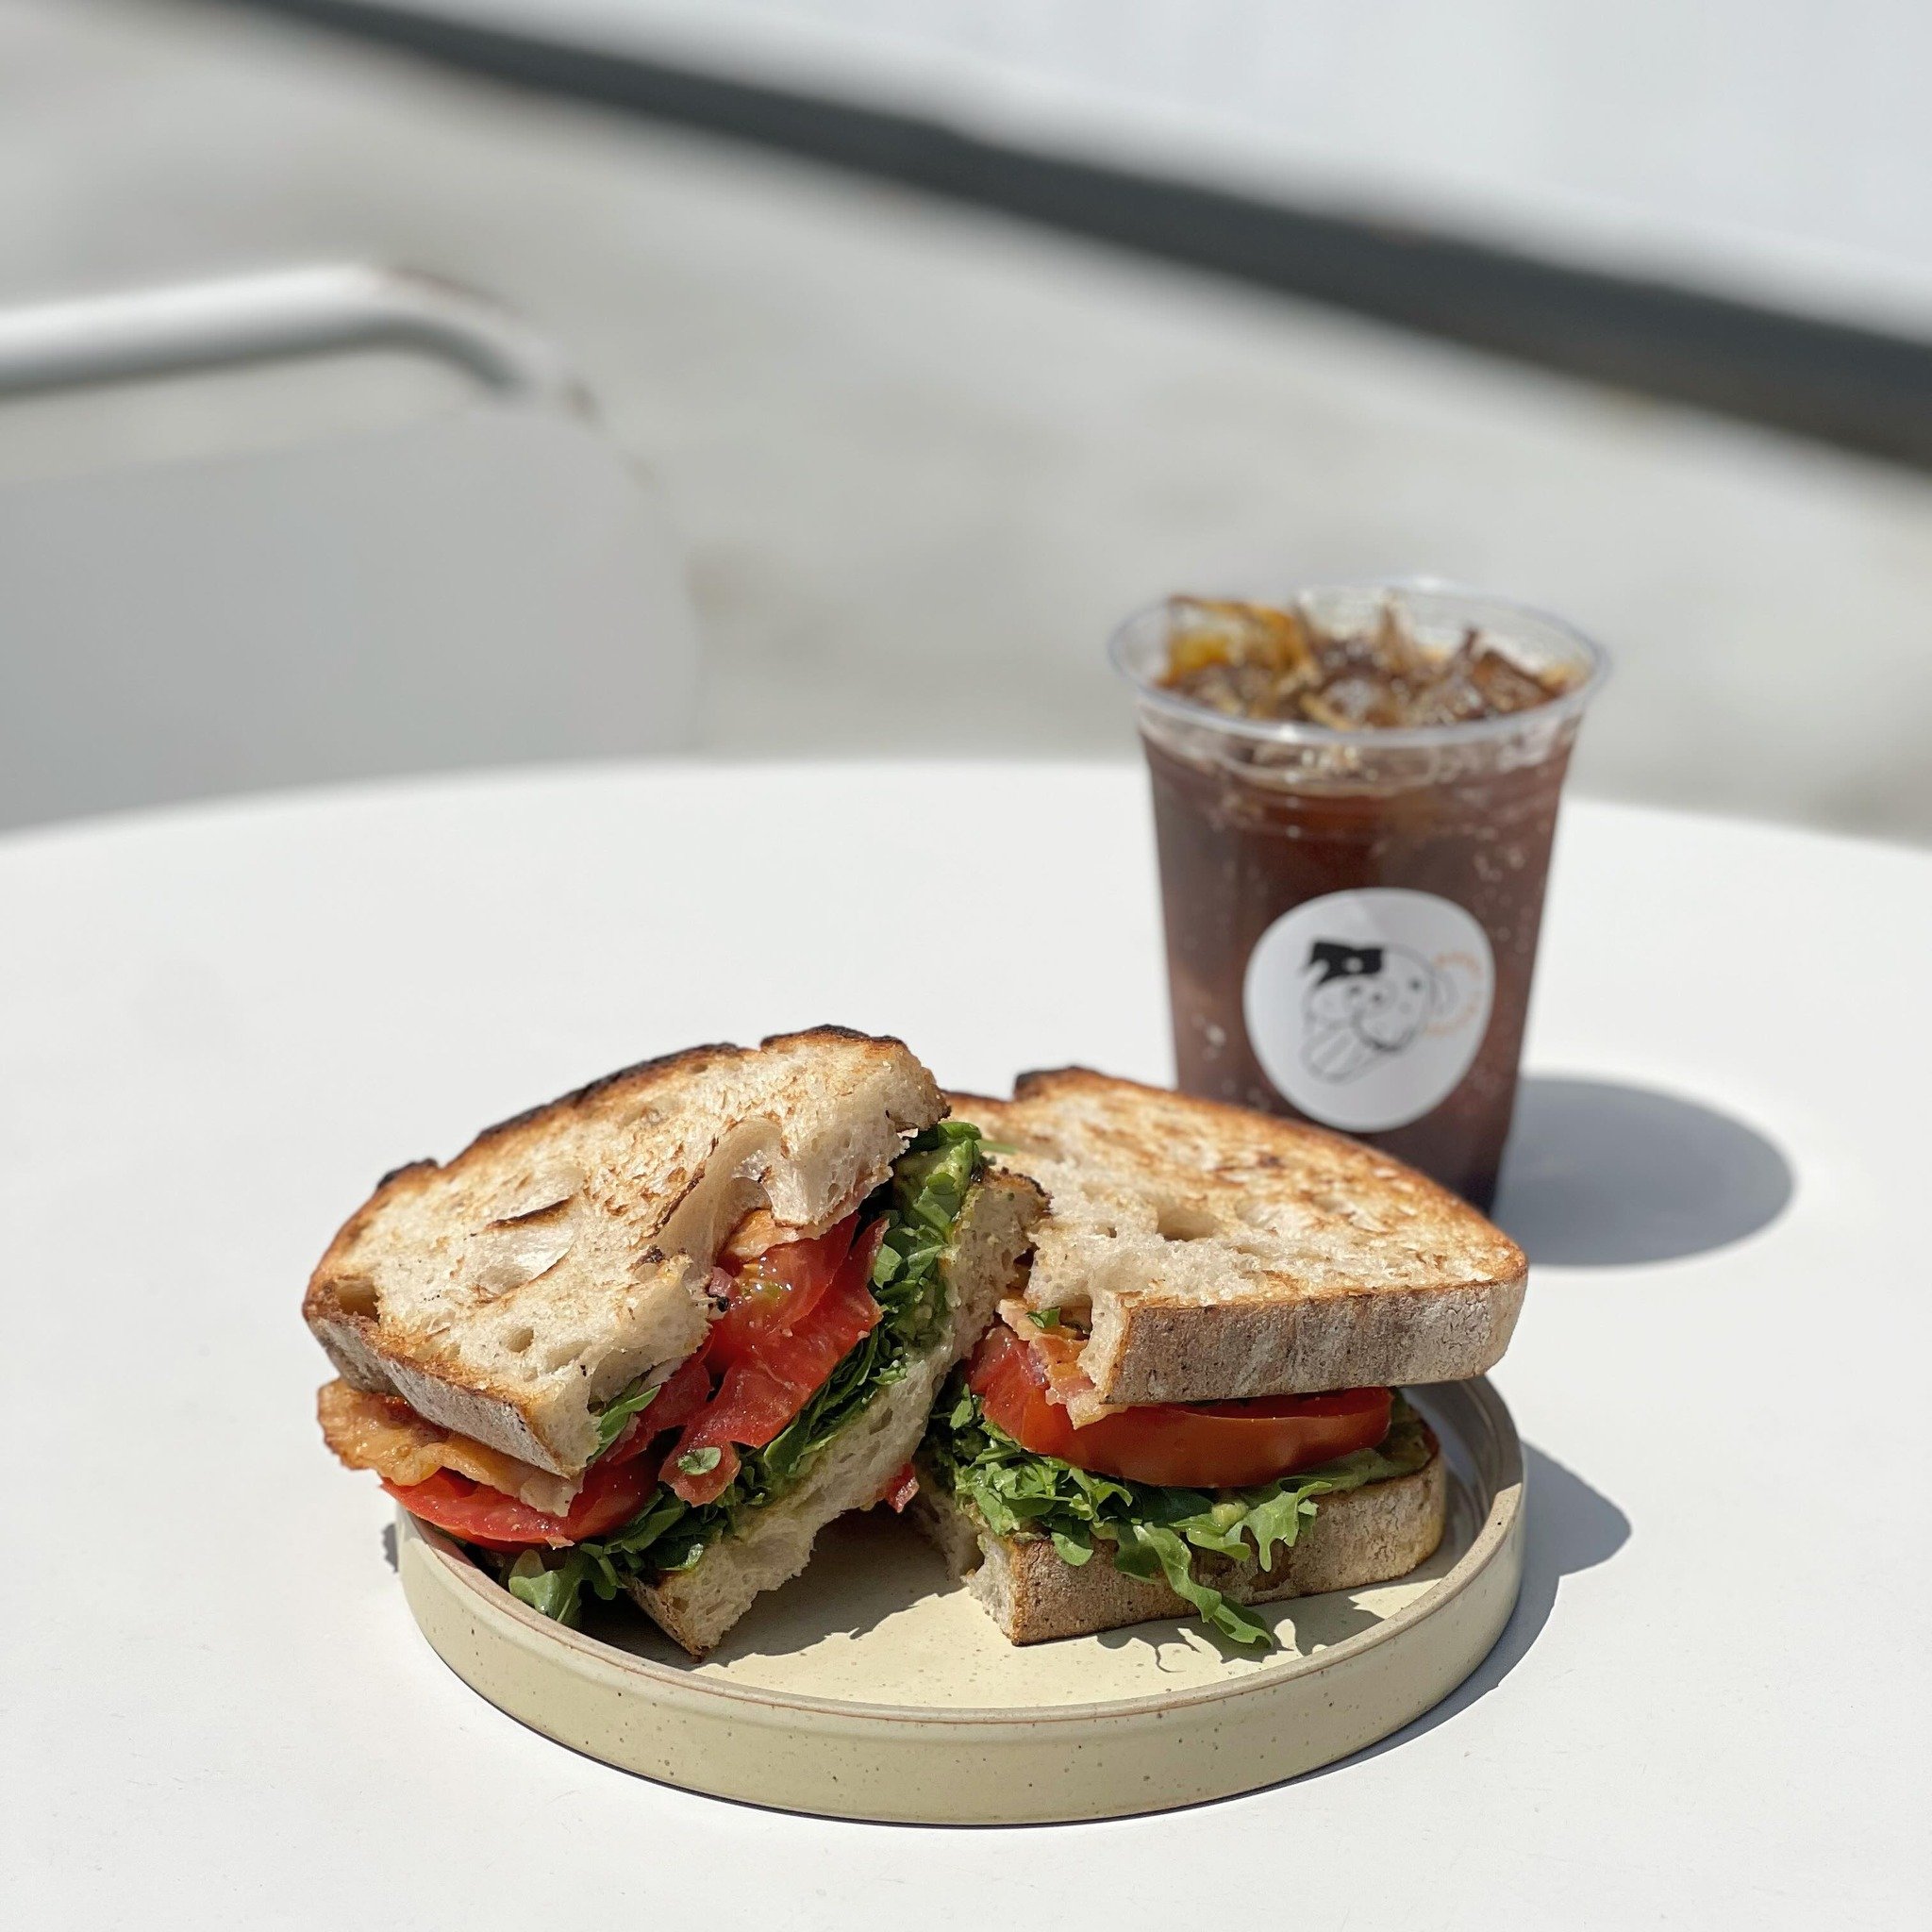 ⛅️ Sun is finally peaking through the clouds today in Costa Mesa! ⛅️ 

Perfect day to grab lunch on the patio. Come try our BAT Sammy and ask for our Blueberry Espresso Tonic (secret menu) for that mid-day pick me up. 

🥪 The BAT Sammy: Bacon, Yuzu 